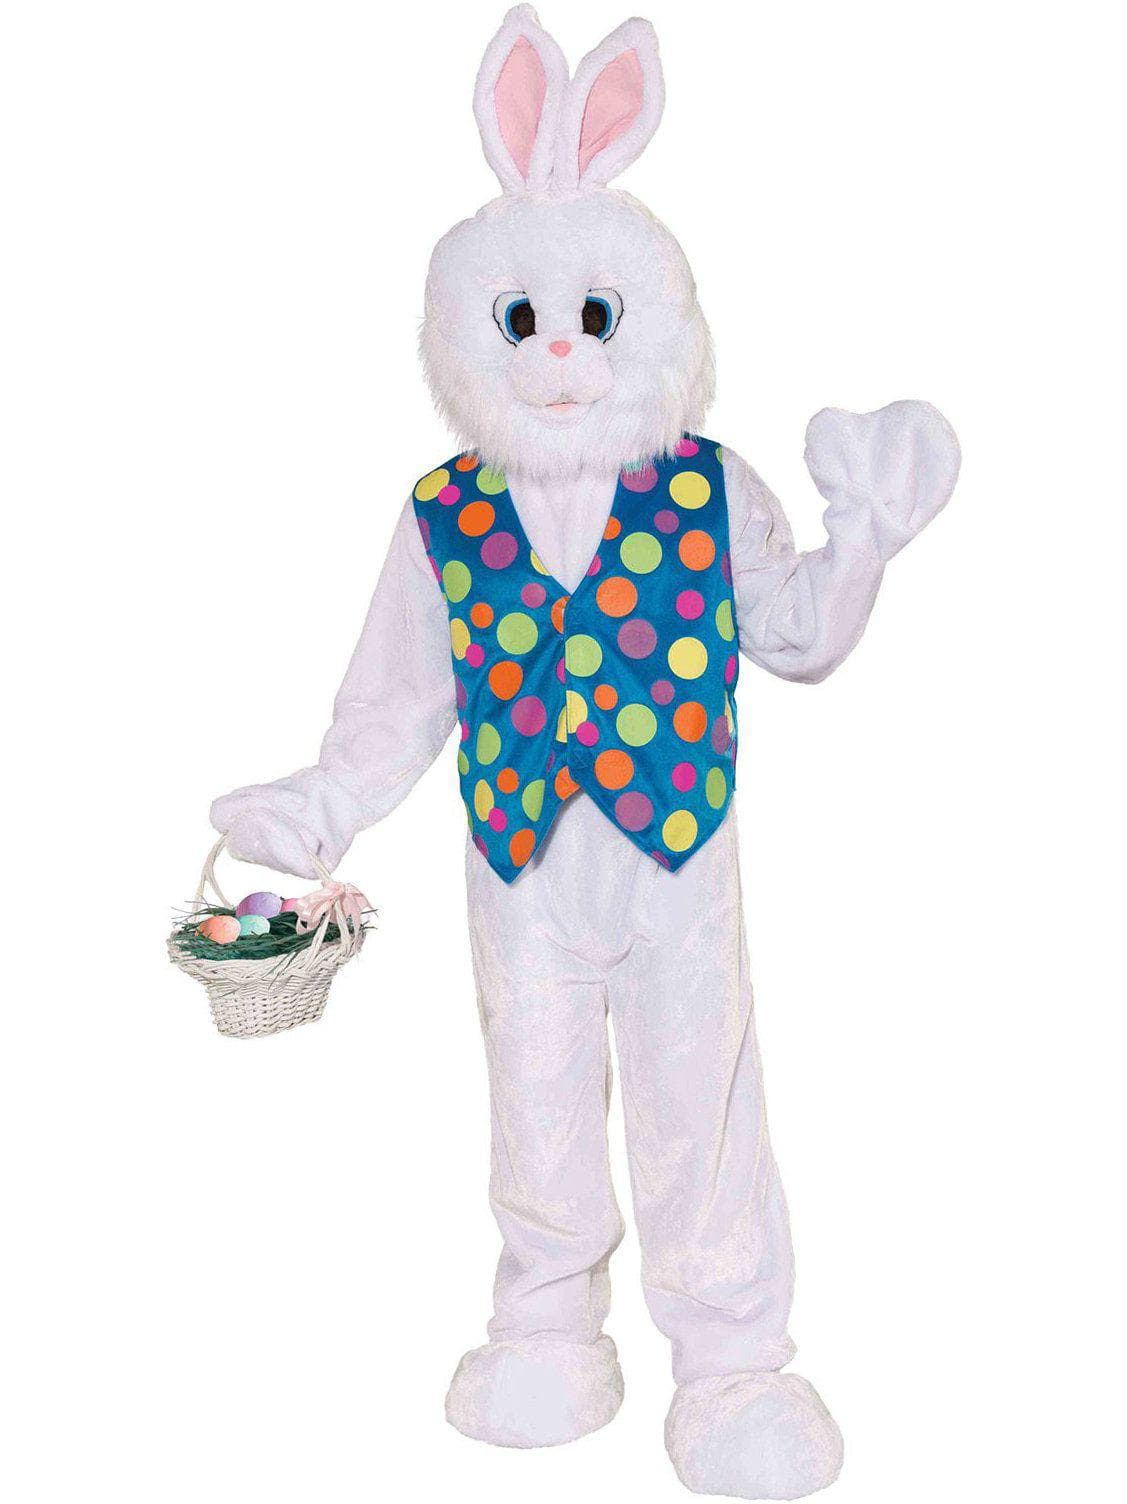 Adult Deluxe Plush Funny Bunny Costume - costumes.com